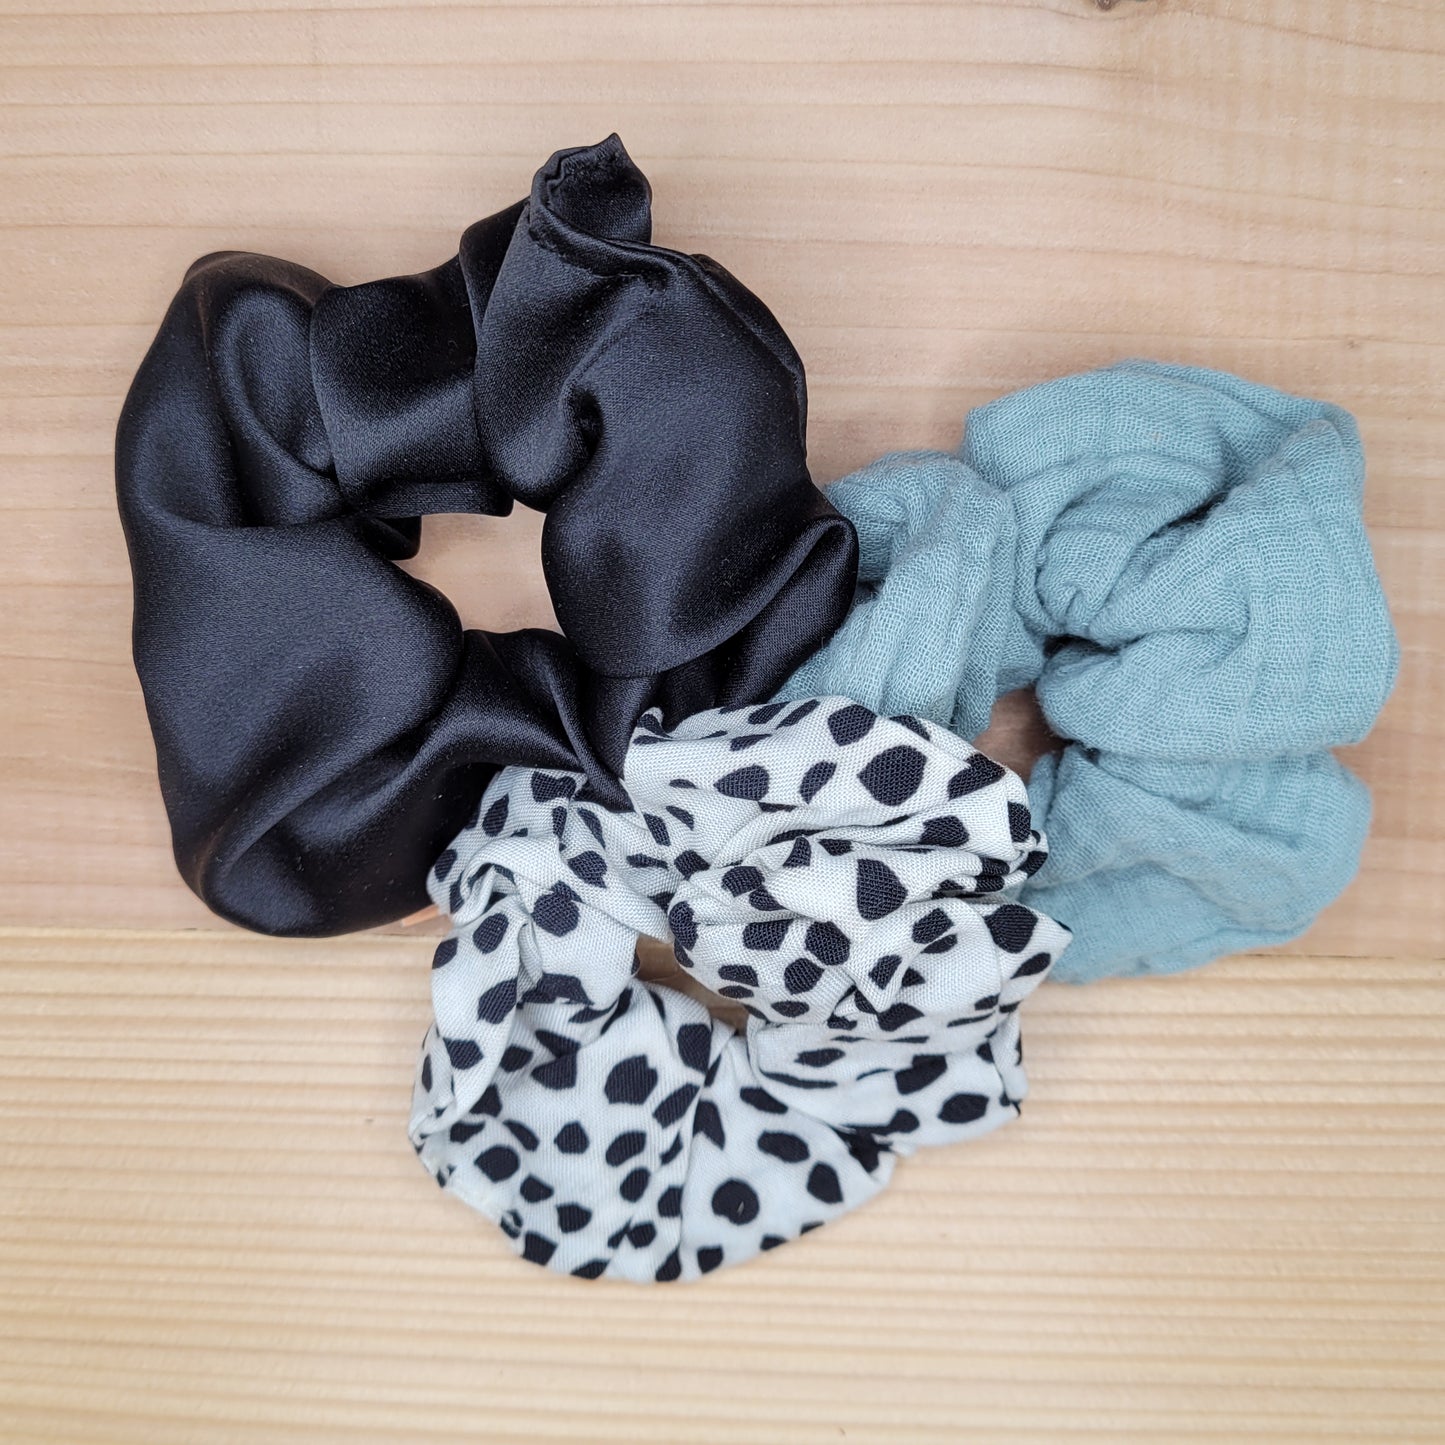 Scrunchie Sets by Not i But We